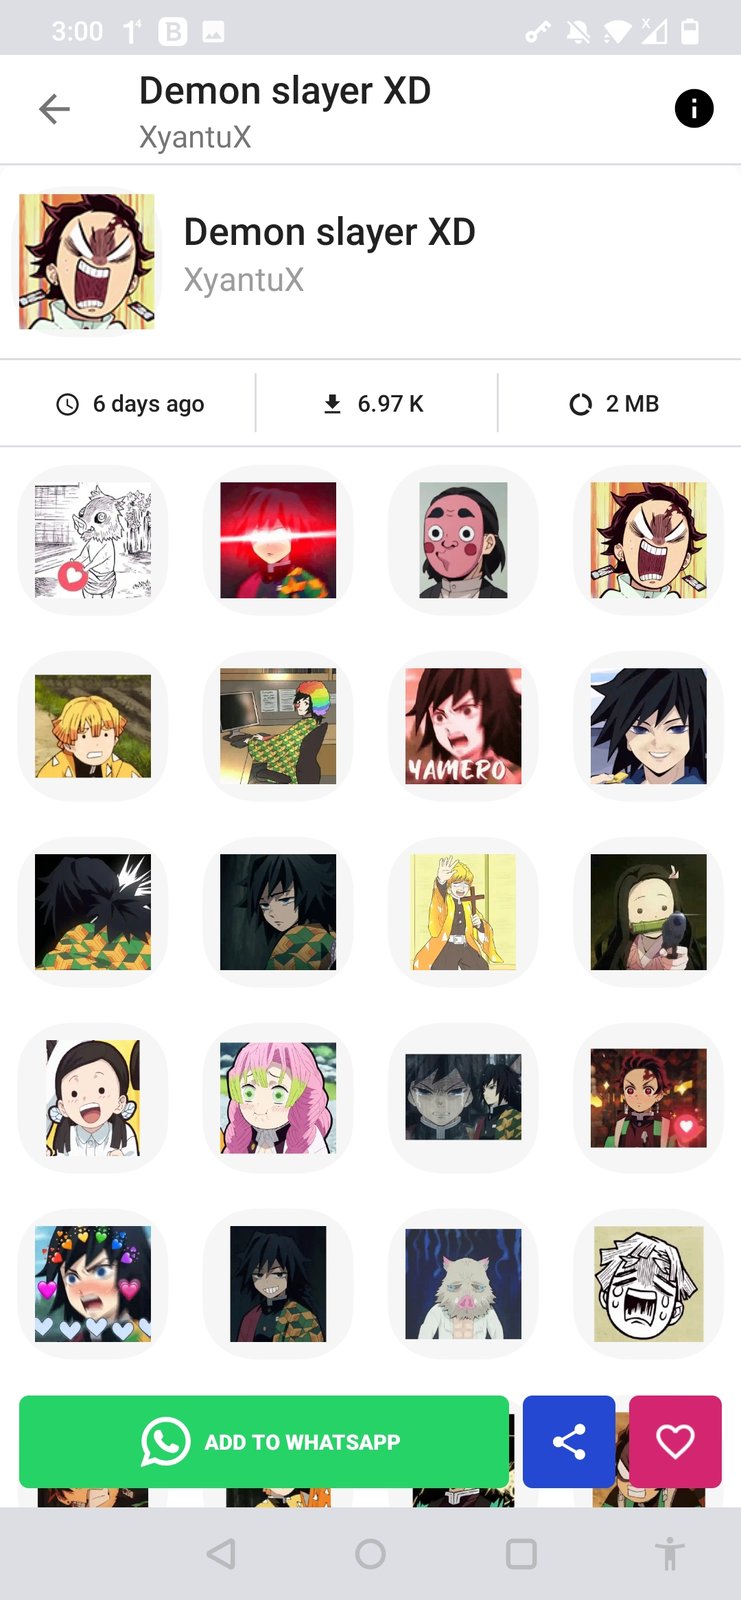 Anime Memes Stickers For WhatsApp 2021 v2.1 [Premium] APK -   - Android & iOS MODs, Mobile Games & Apps